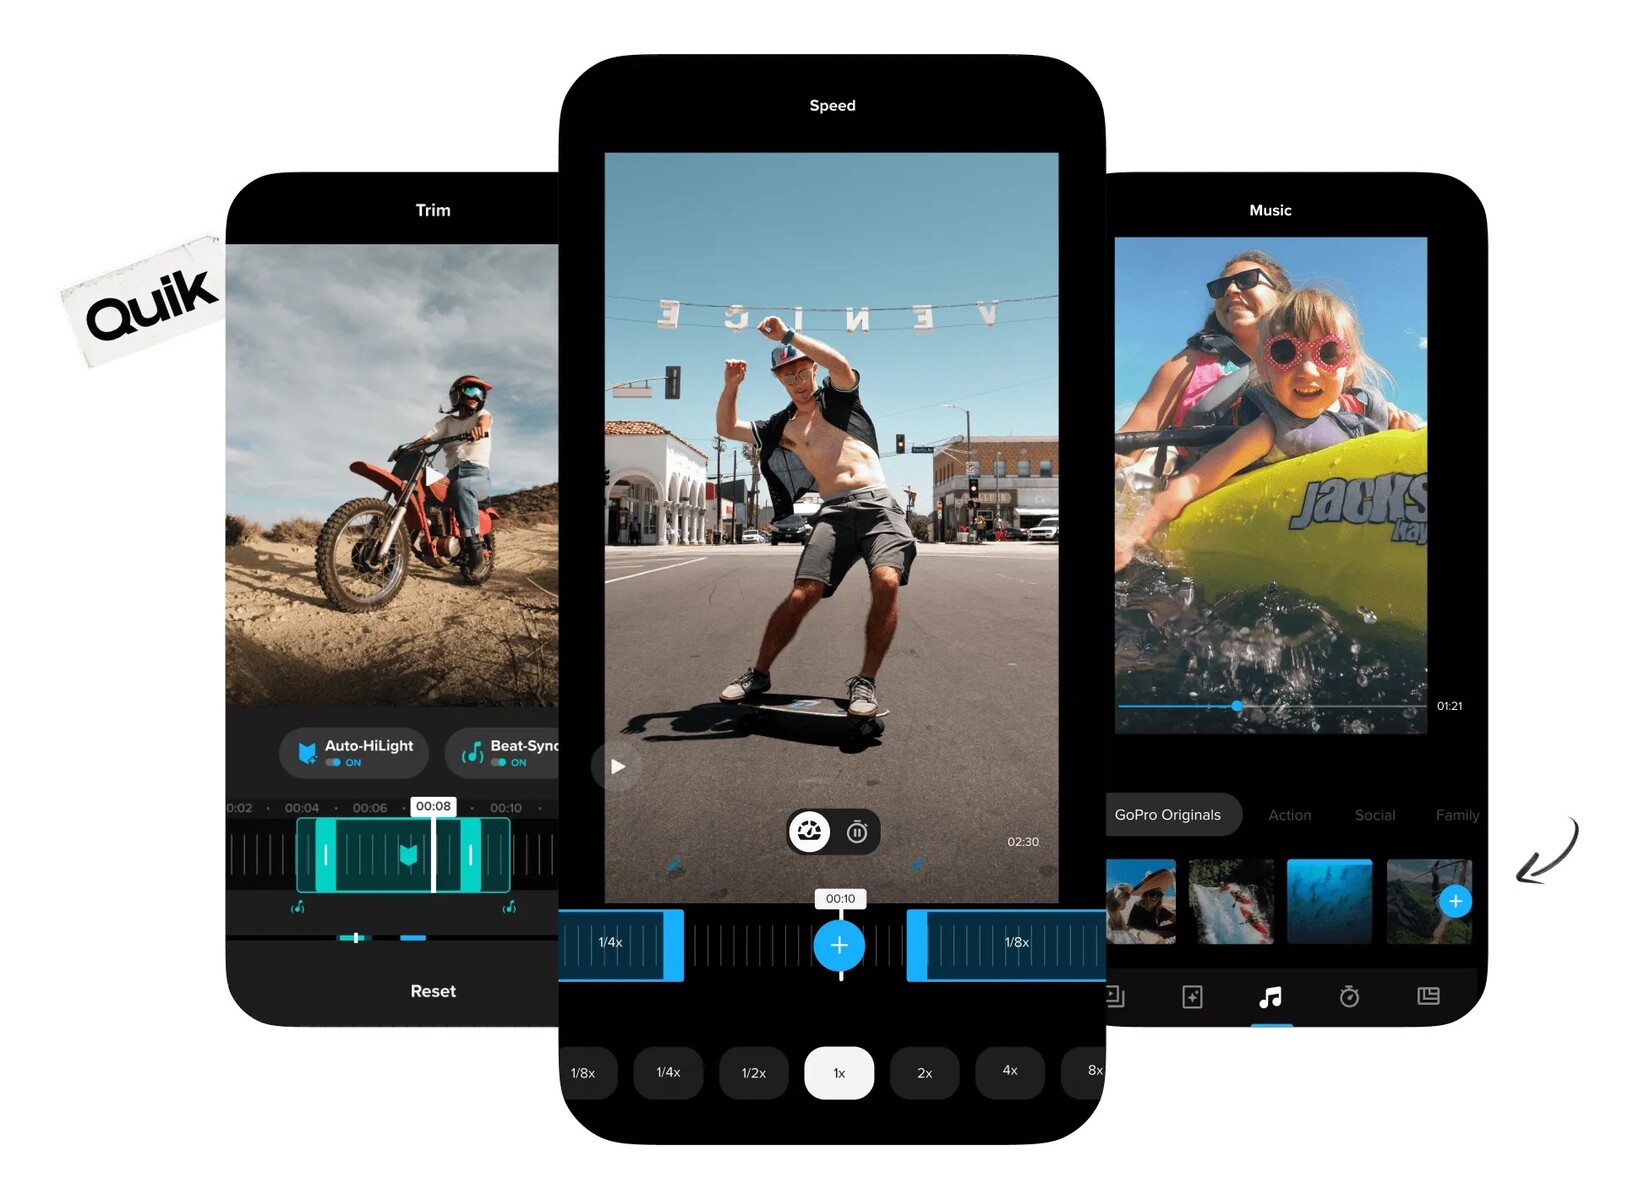 DJI Osmo Action 4: New US$399 action camera gets ahead of GoPro Hero 12  Black with 1/1.3-inch camera and other improvements -  News